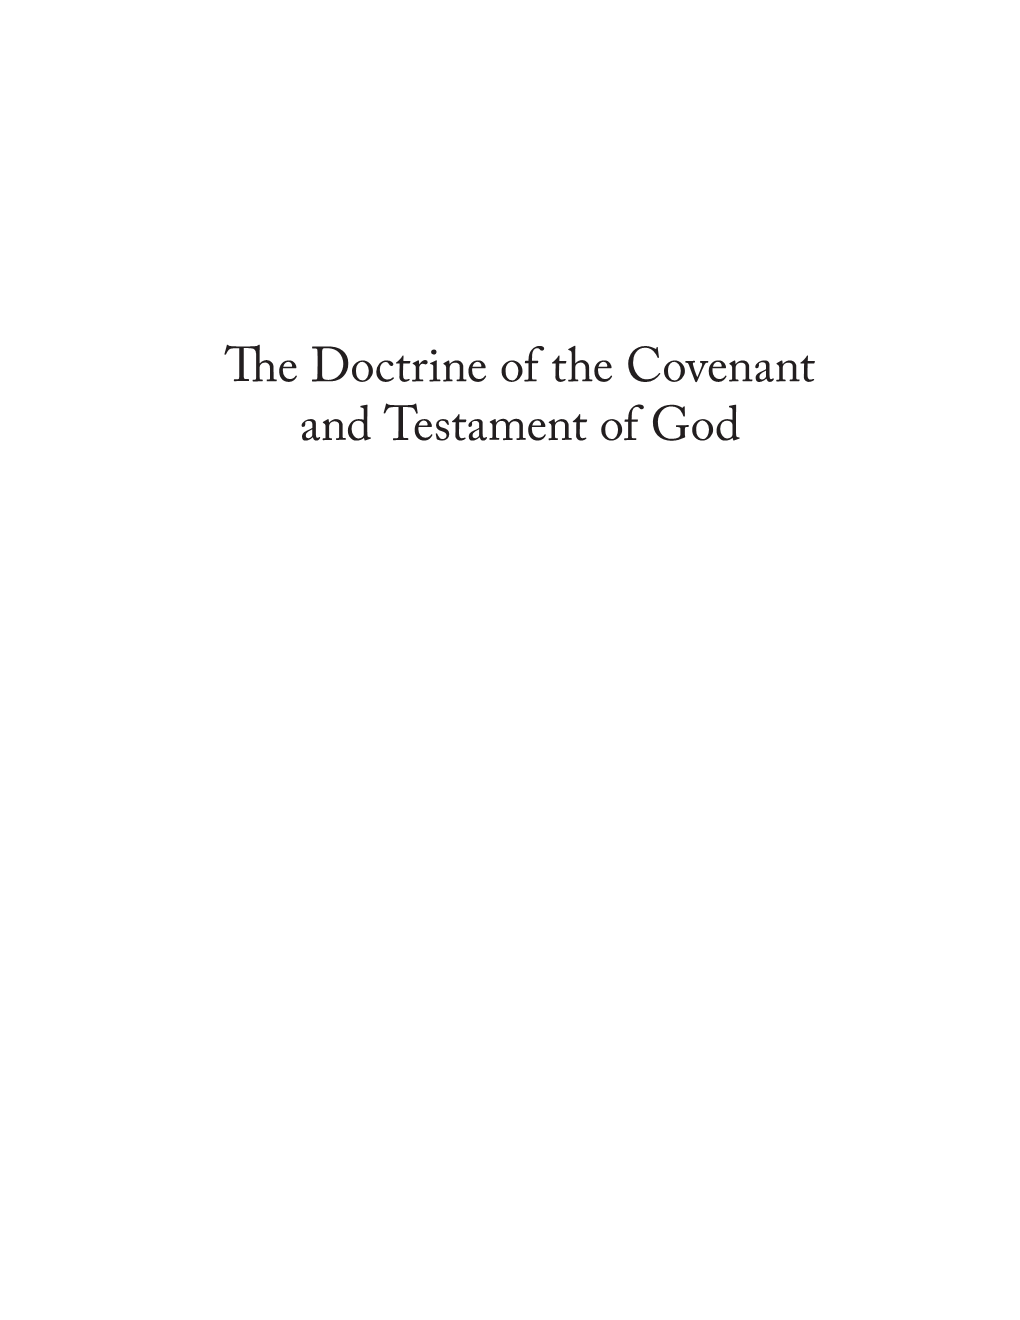 He Doctrine of the Covenant and Testament Of